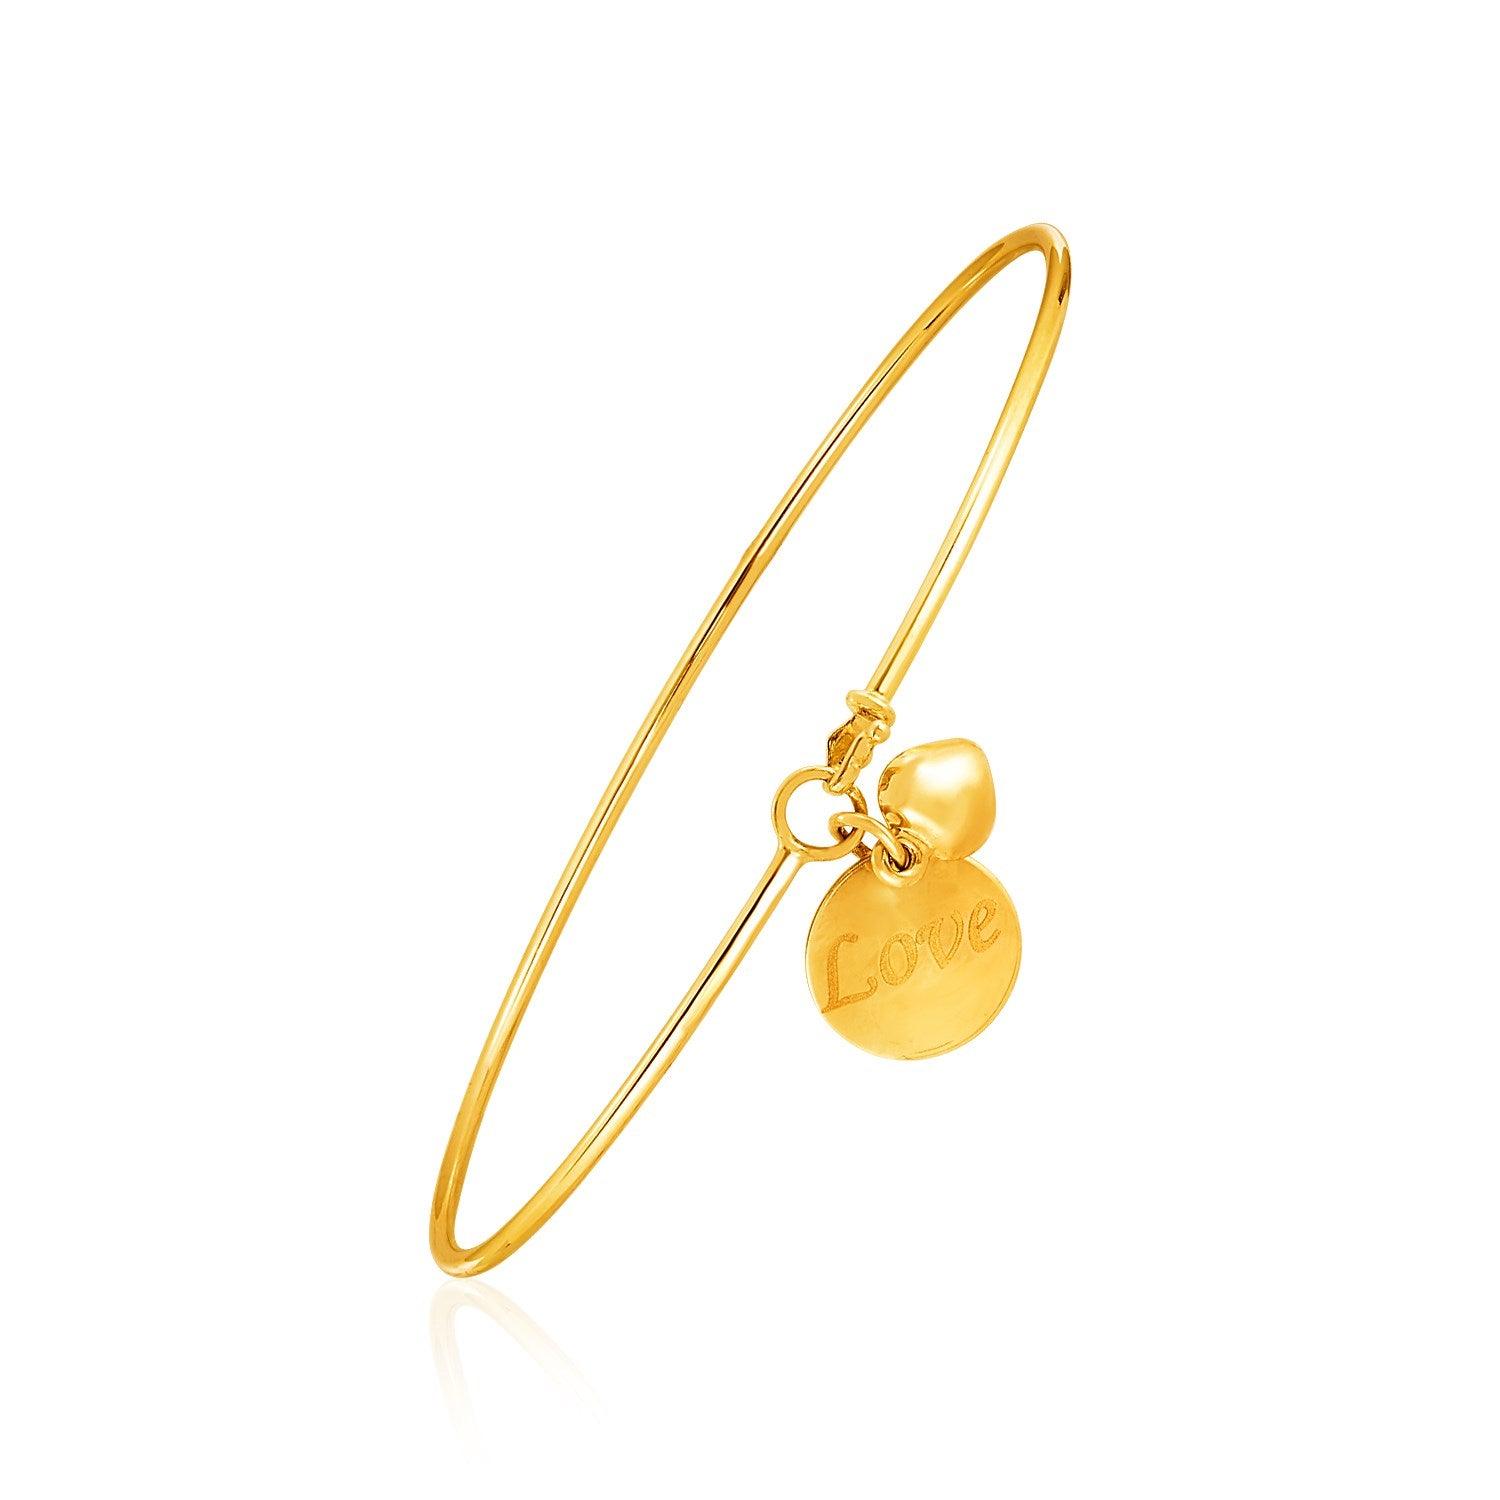 14k Yellow Gold Bangle with Engraved Love and Puffed Heart Charms freeshipping - Higher Class Elegance